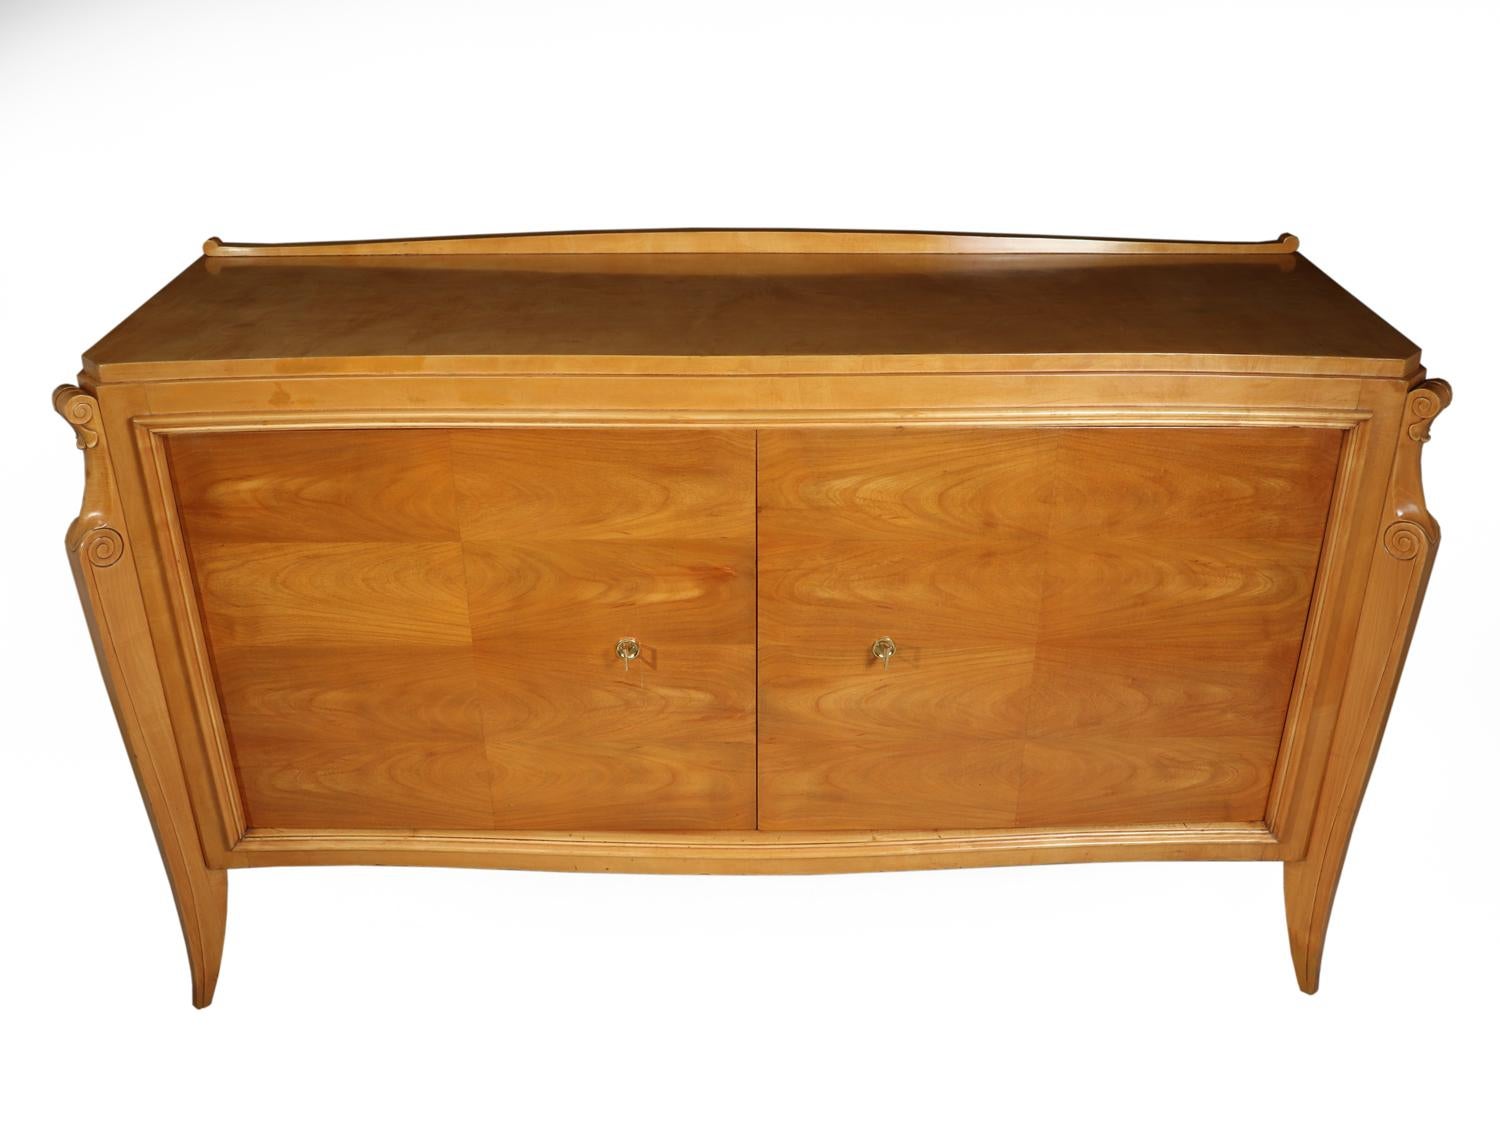 Italian Art Deco sideboard , circa 1930
This Original Italian, Satin Birch, Art Deco sideboard from the 1930s. It has two lockable door with one key. Inside the sideboard are two shelves that can be adjusted to give different heights and has been